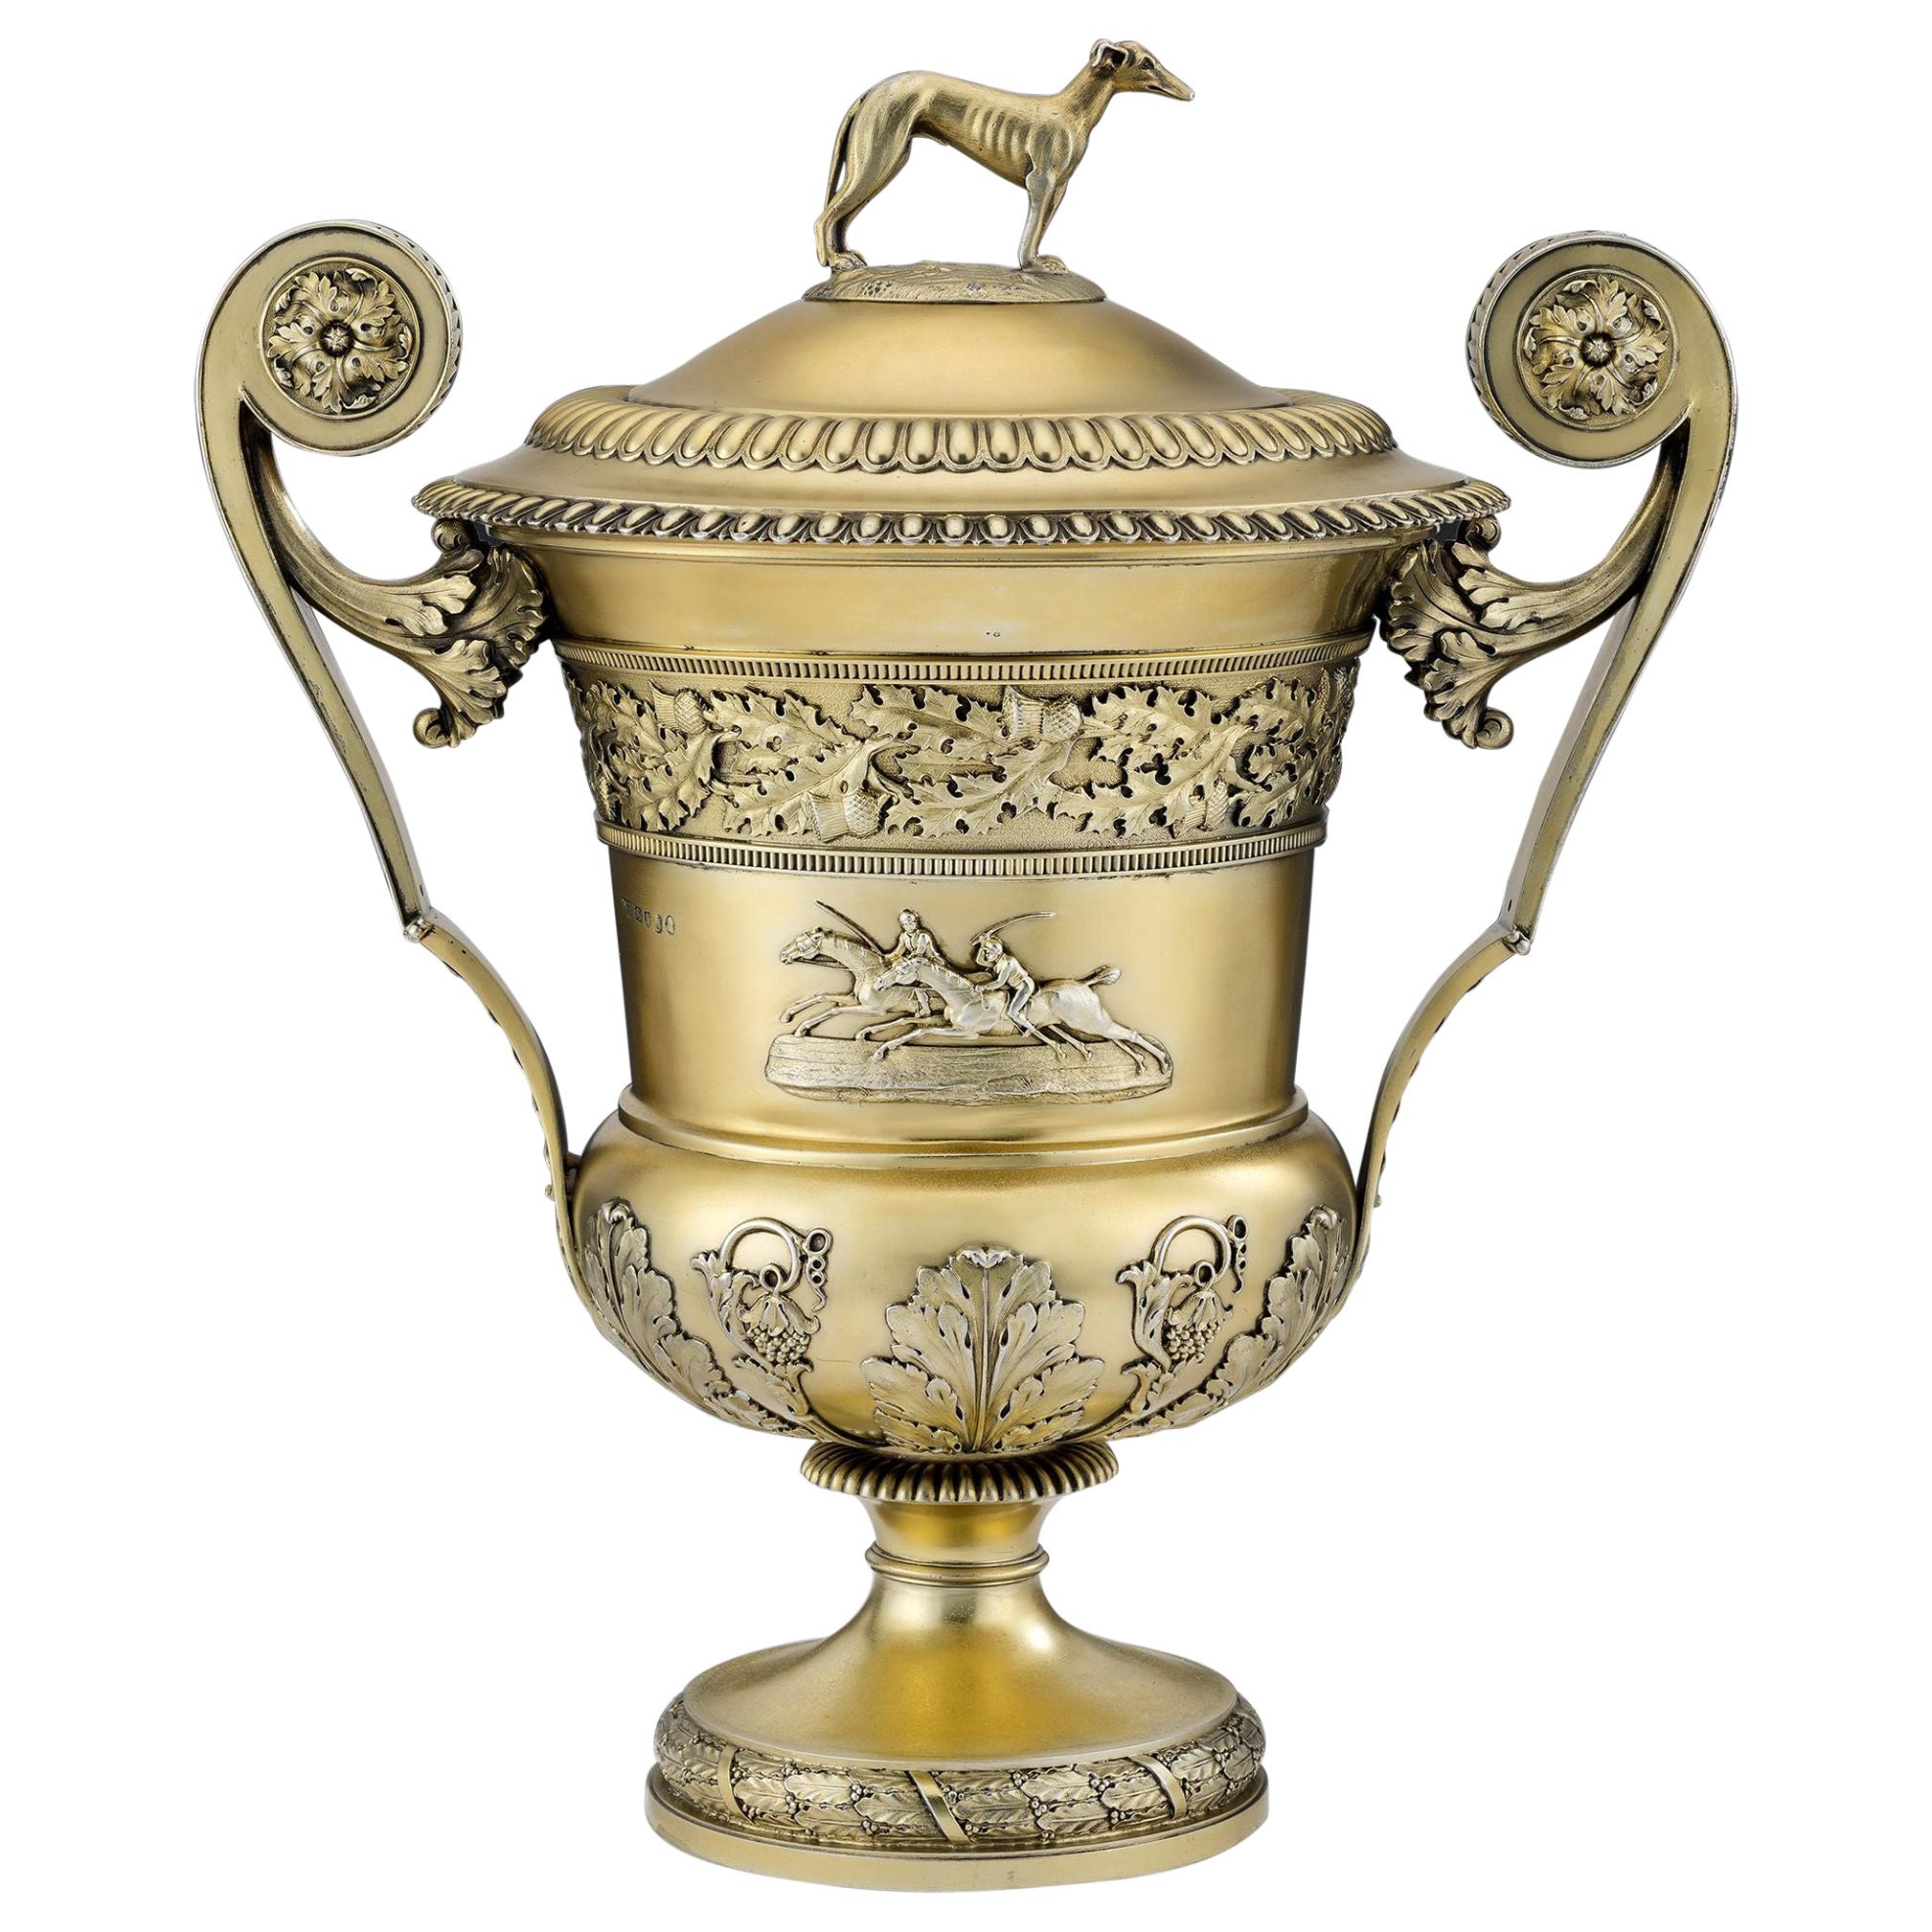 George III Silver Gilt Cup & Cover Made in London in 1815 by William Elliot